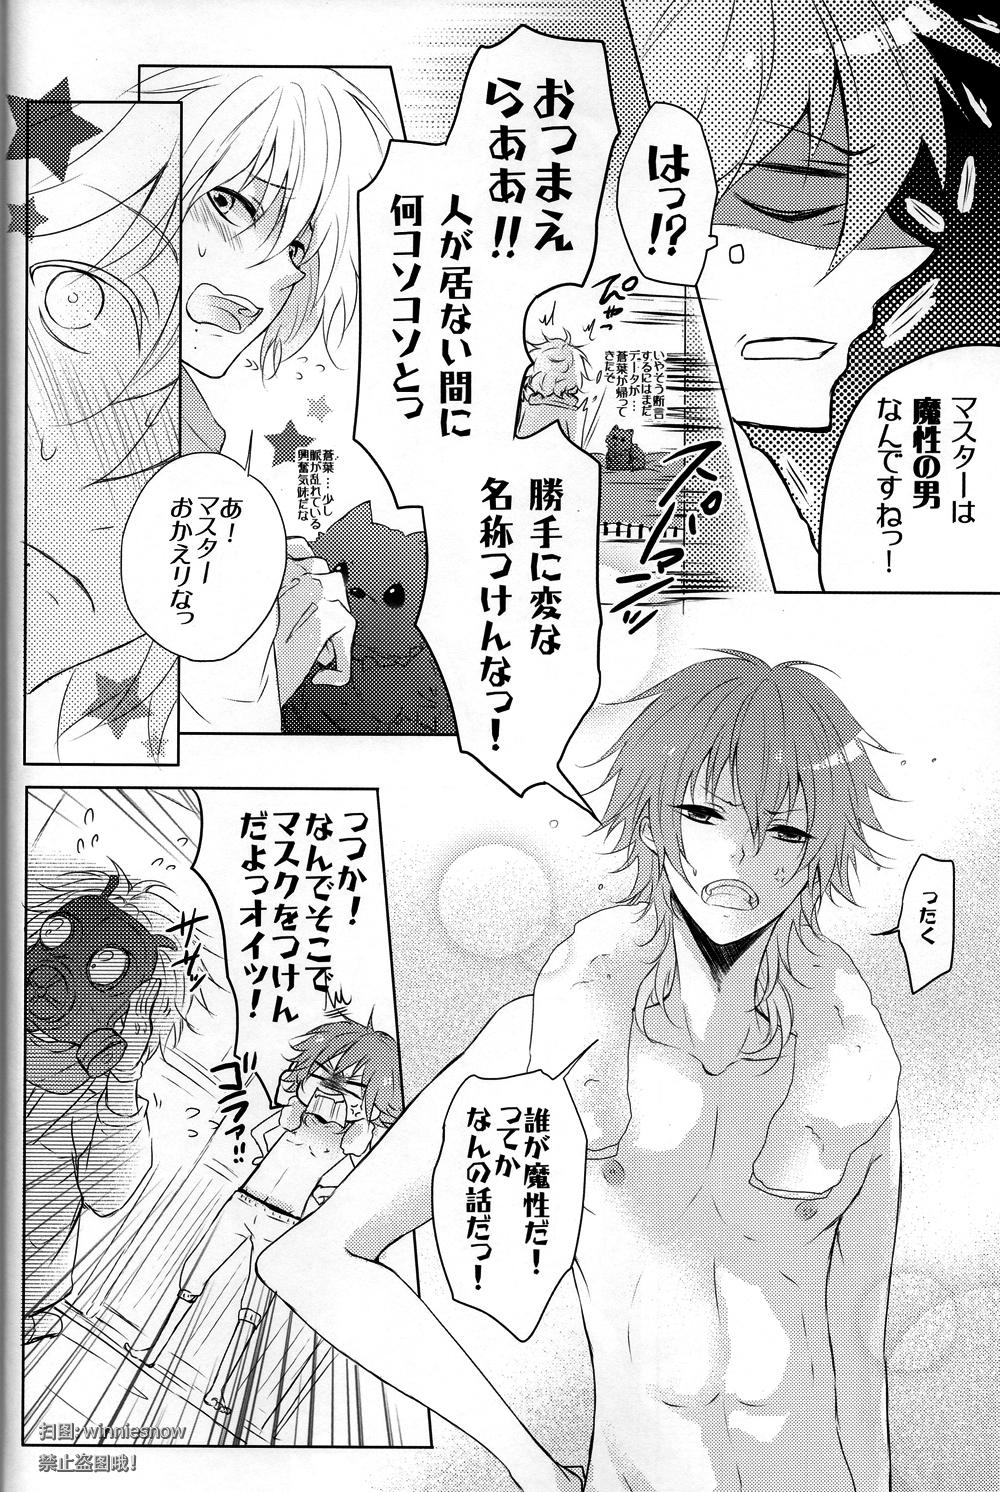 Toes Honeycomb - Dramatical murder Striptease - Page 3